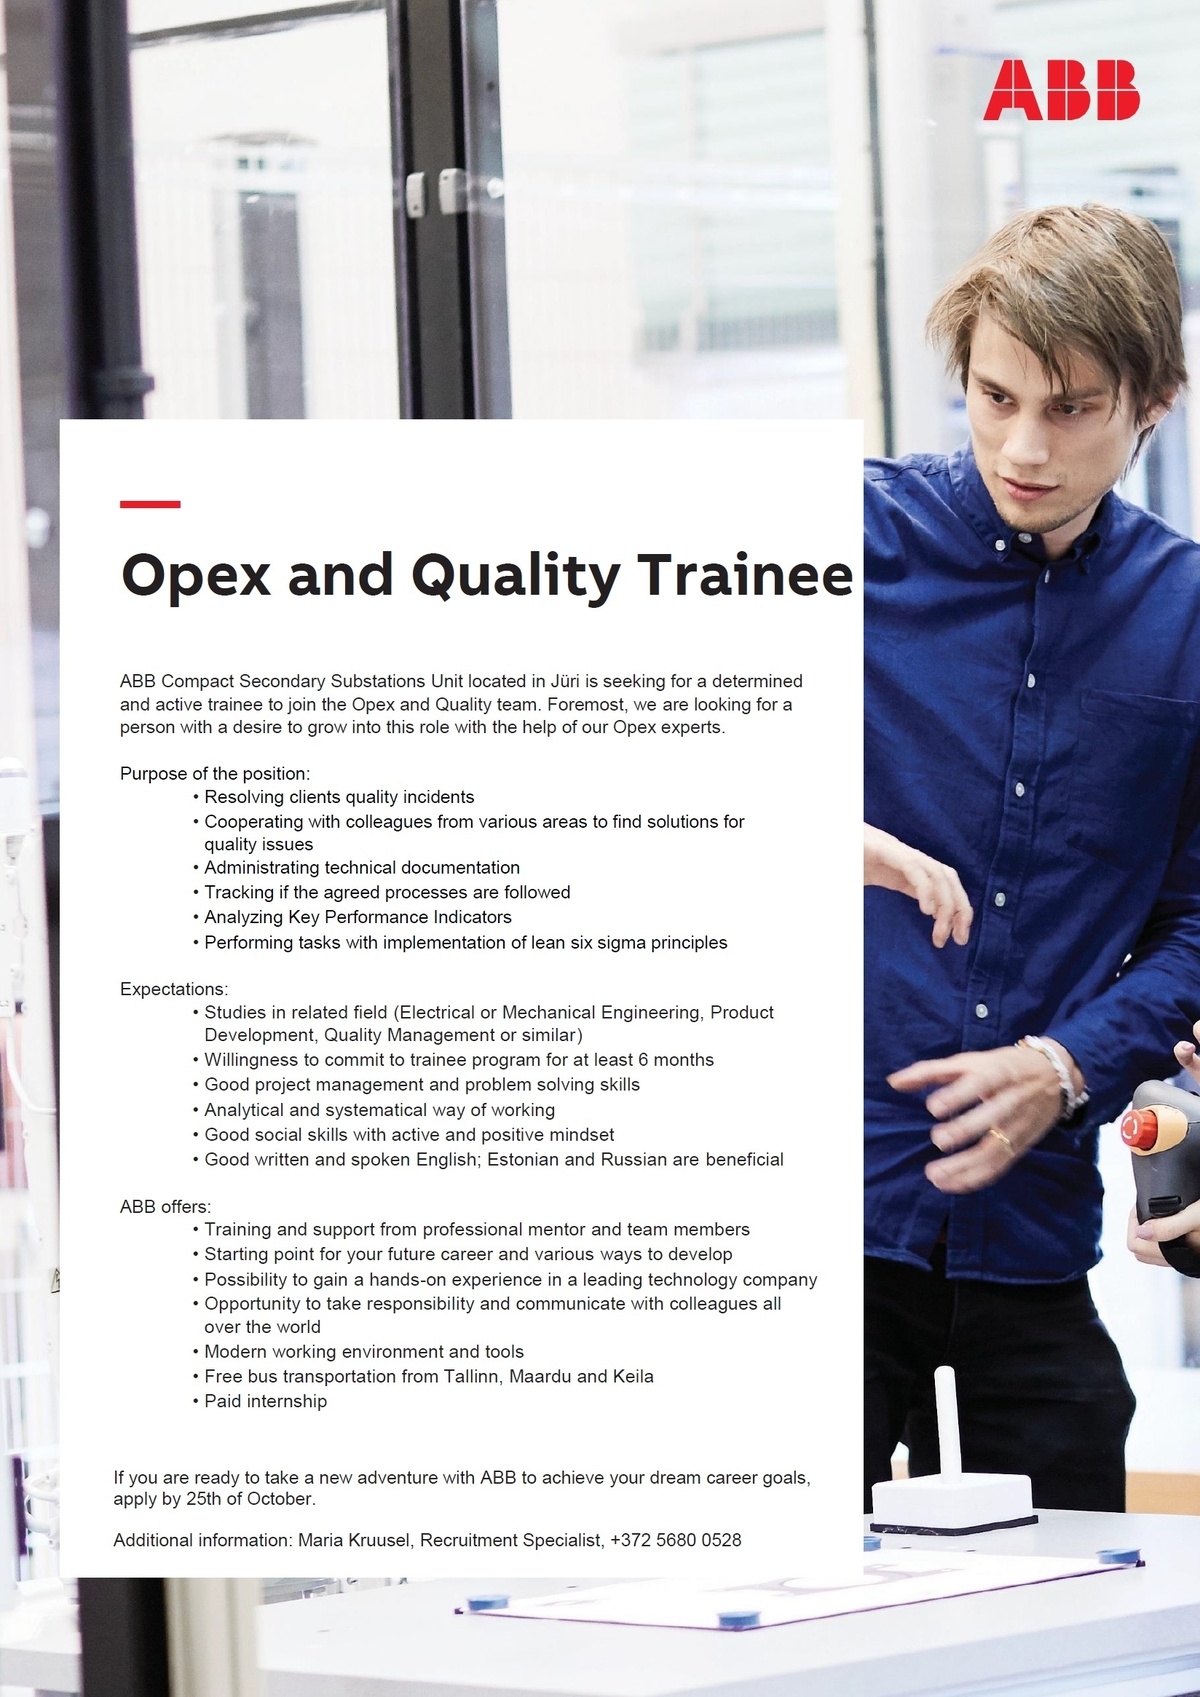 ABB AS Opex and Quality Trainee